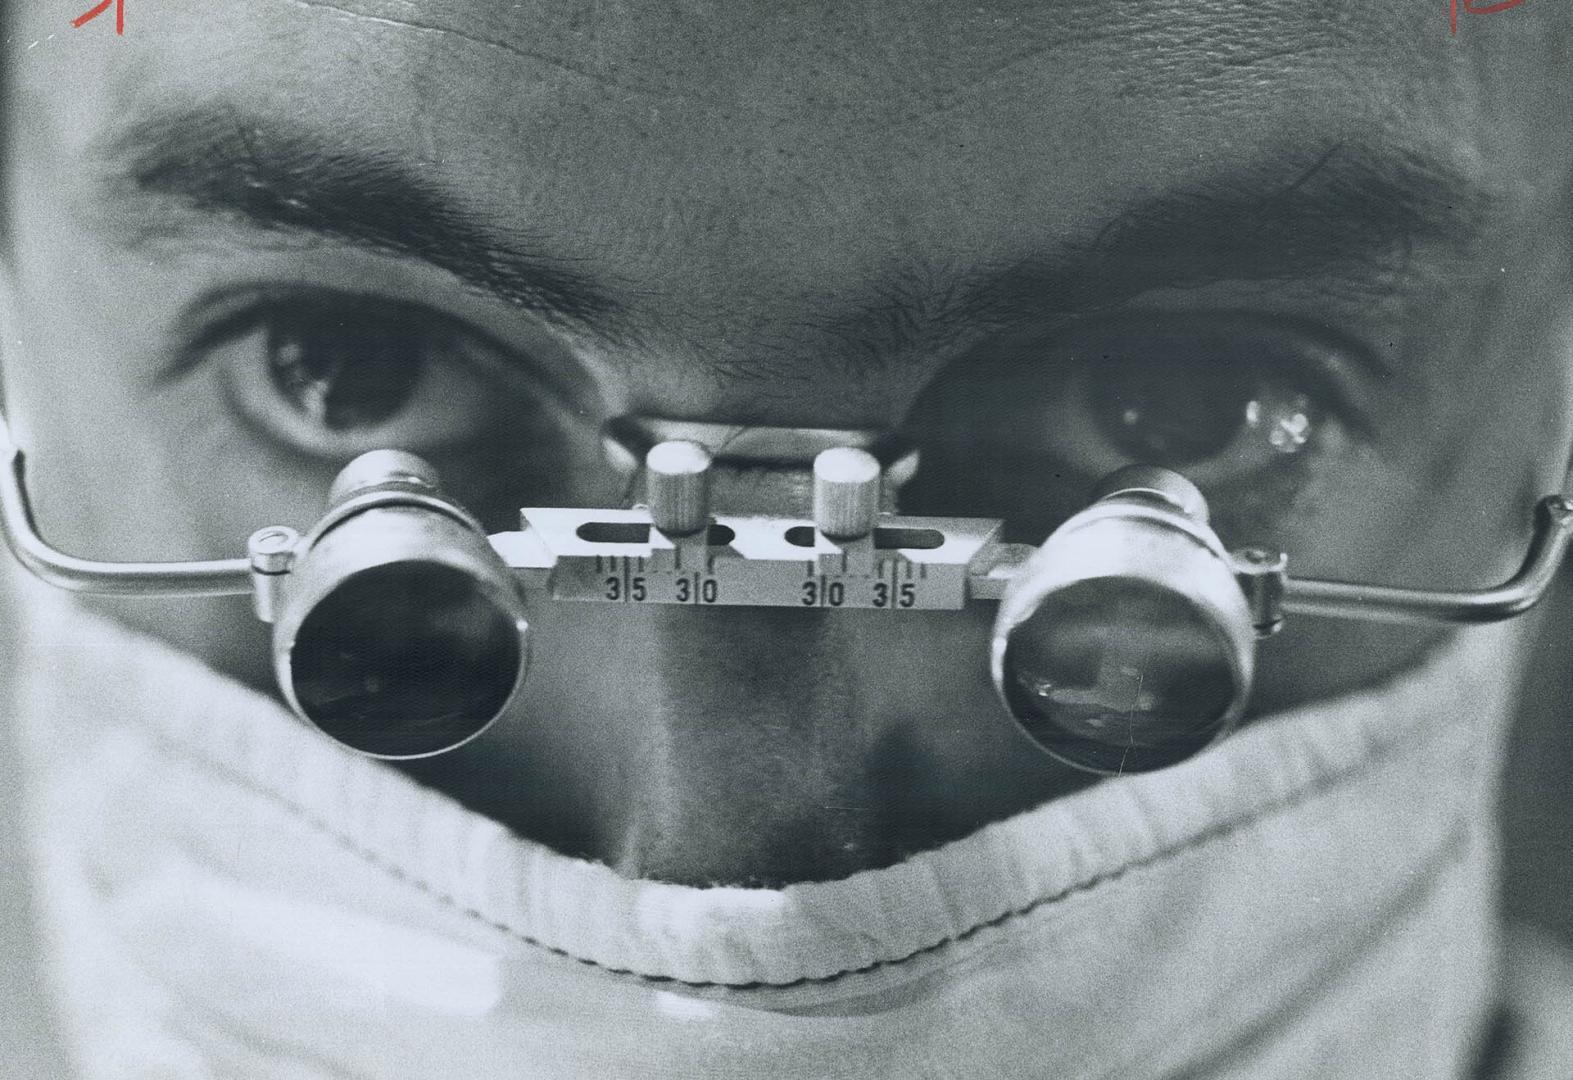 Magnifying spectacles were worn by surgeon during delicate transplant operation as he sliced away corneal tissue that was only tiny fractions of an in(...)